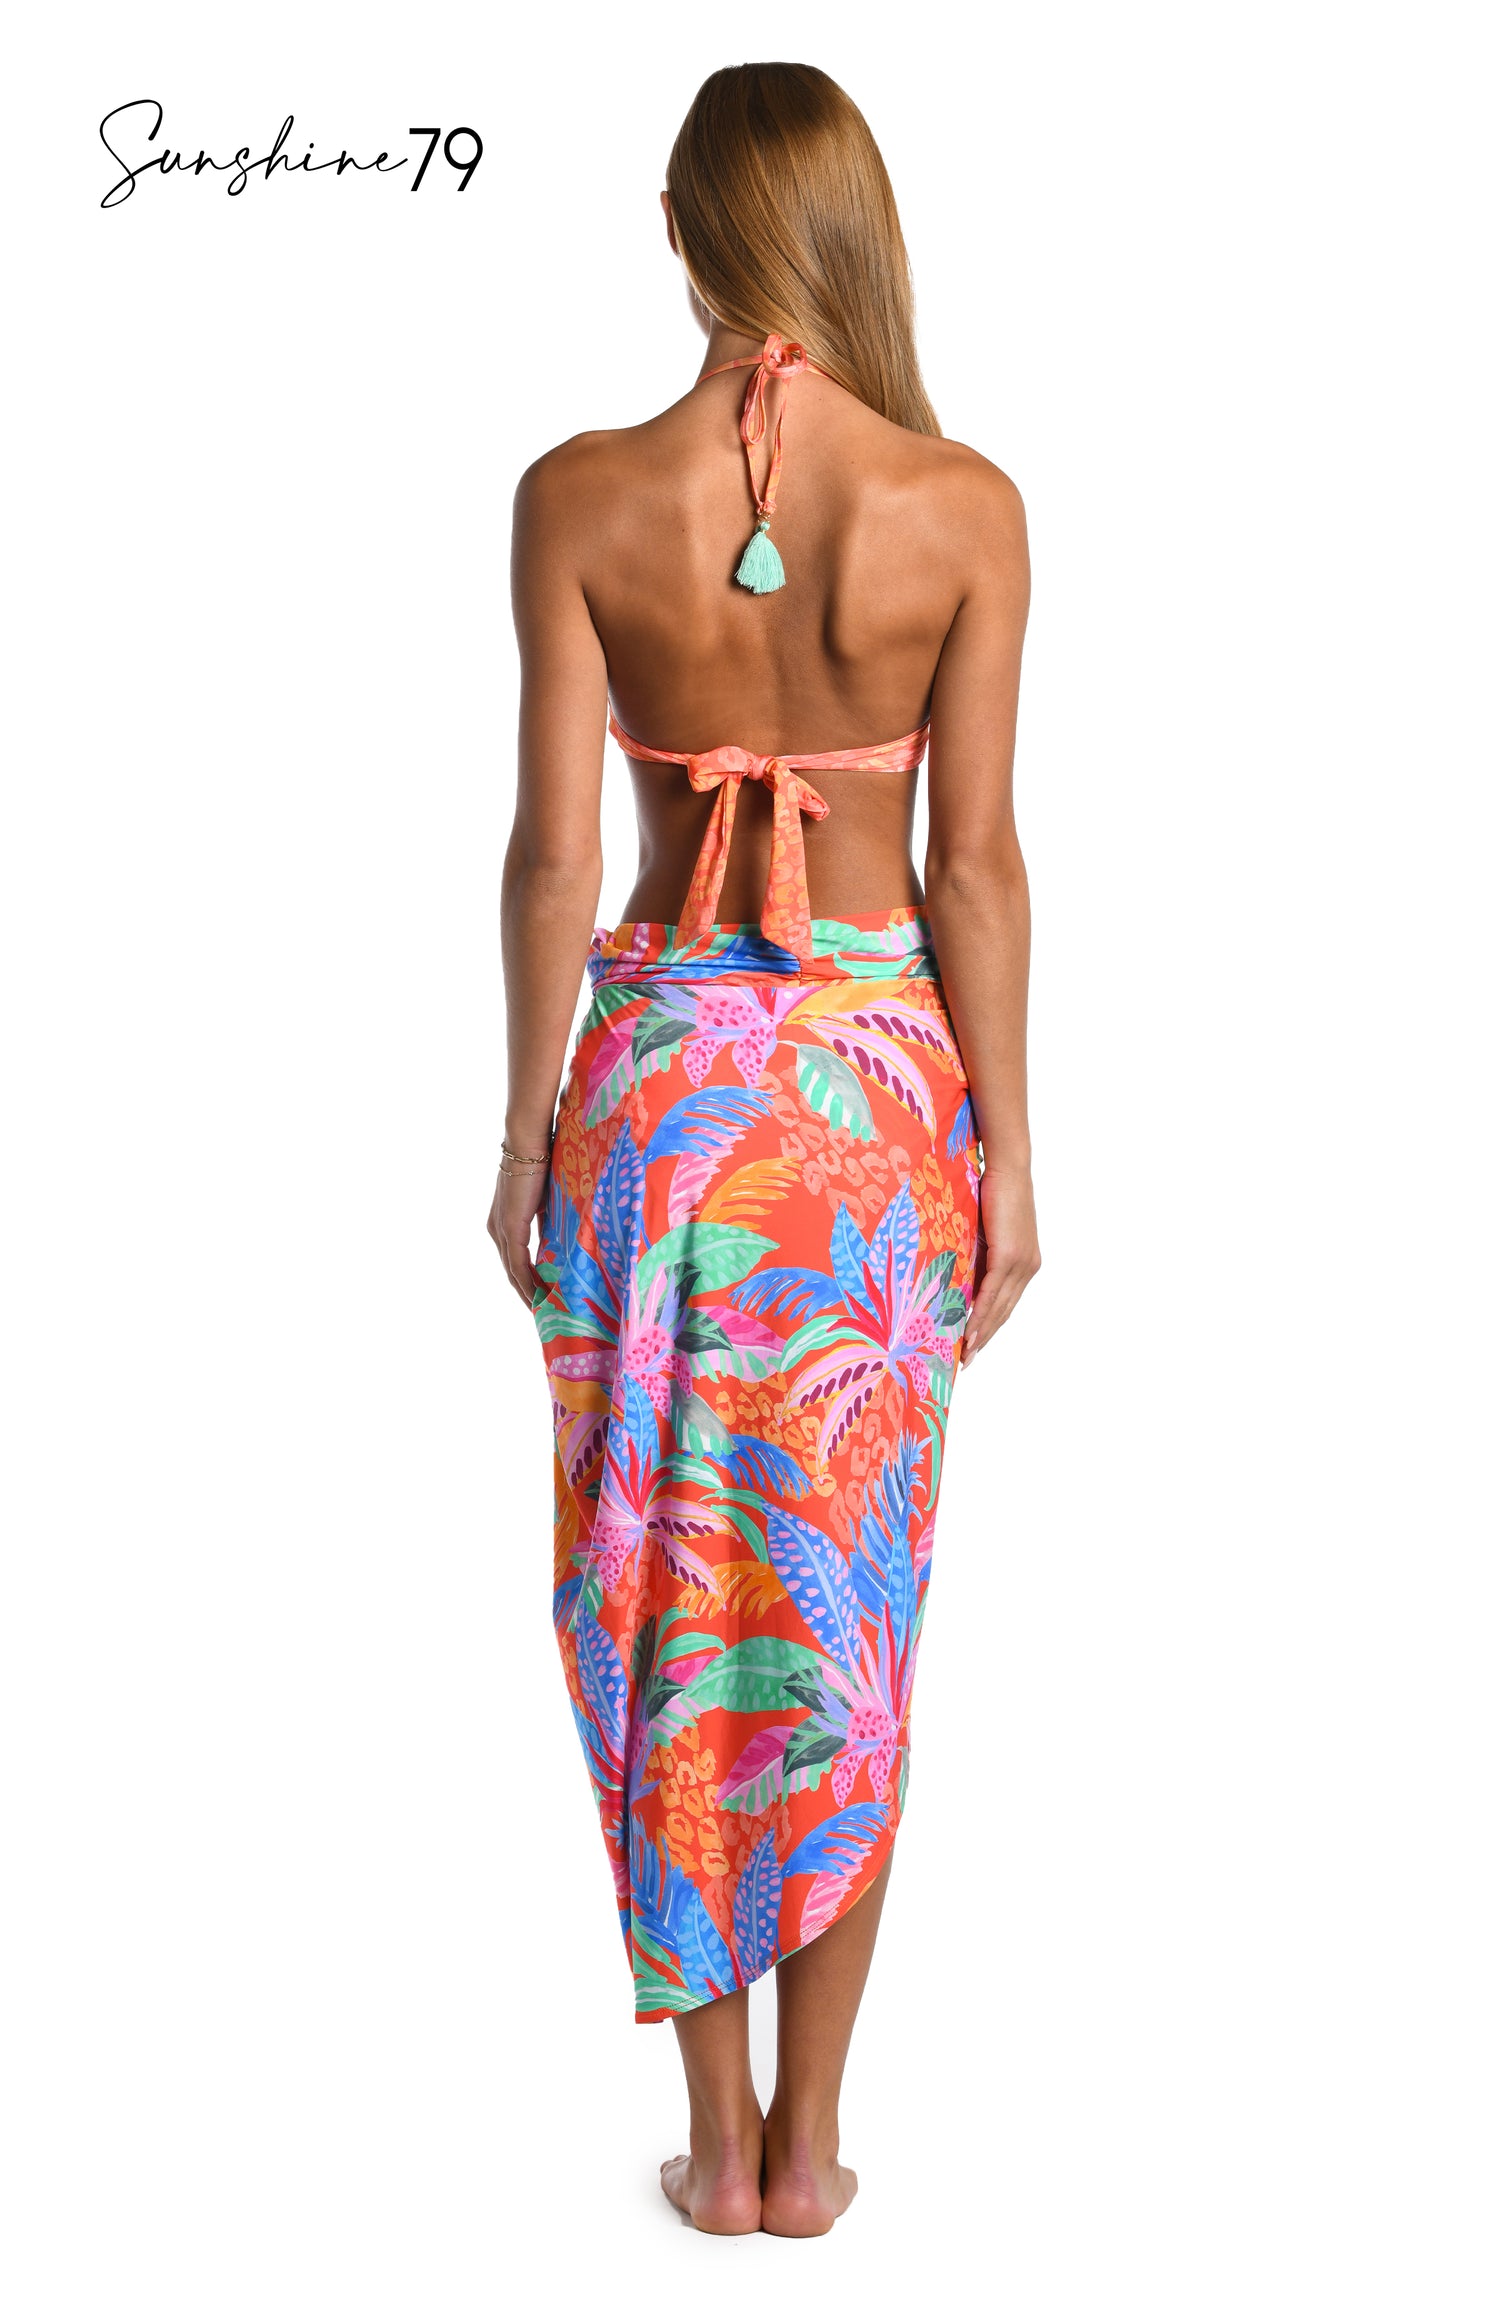 Model is wearing an orange multicolored tropical printed pull on faux pareo wrap cover up from our Sunshine 79 brand.